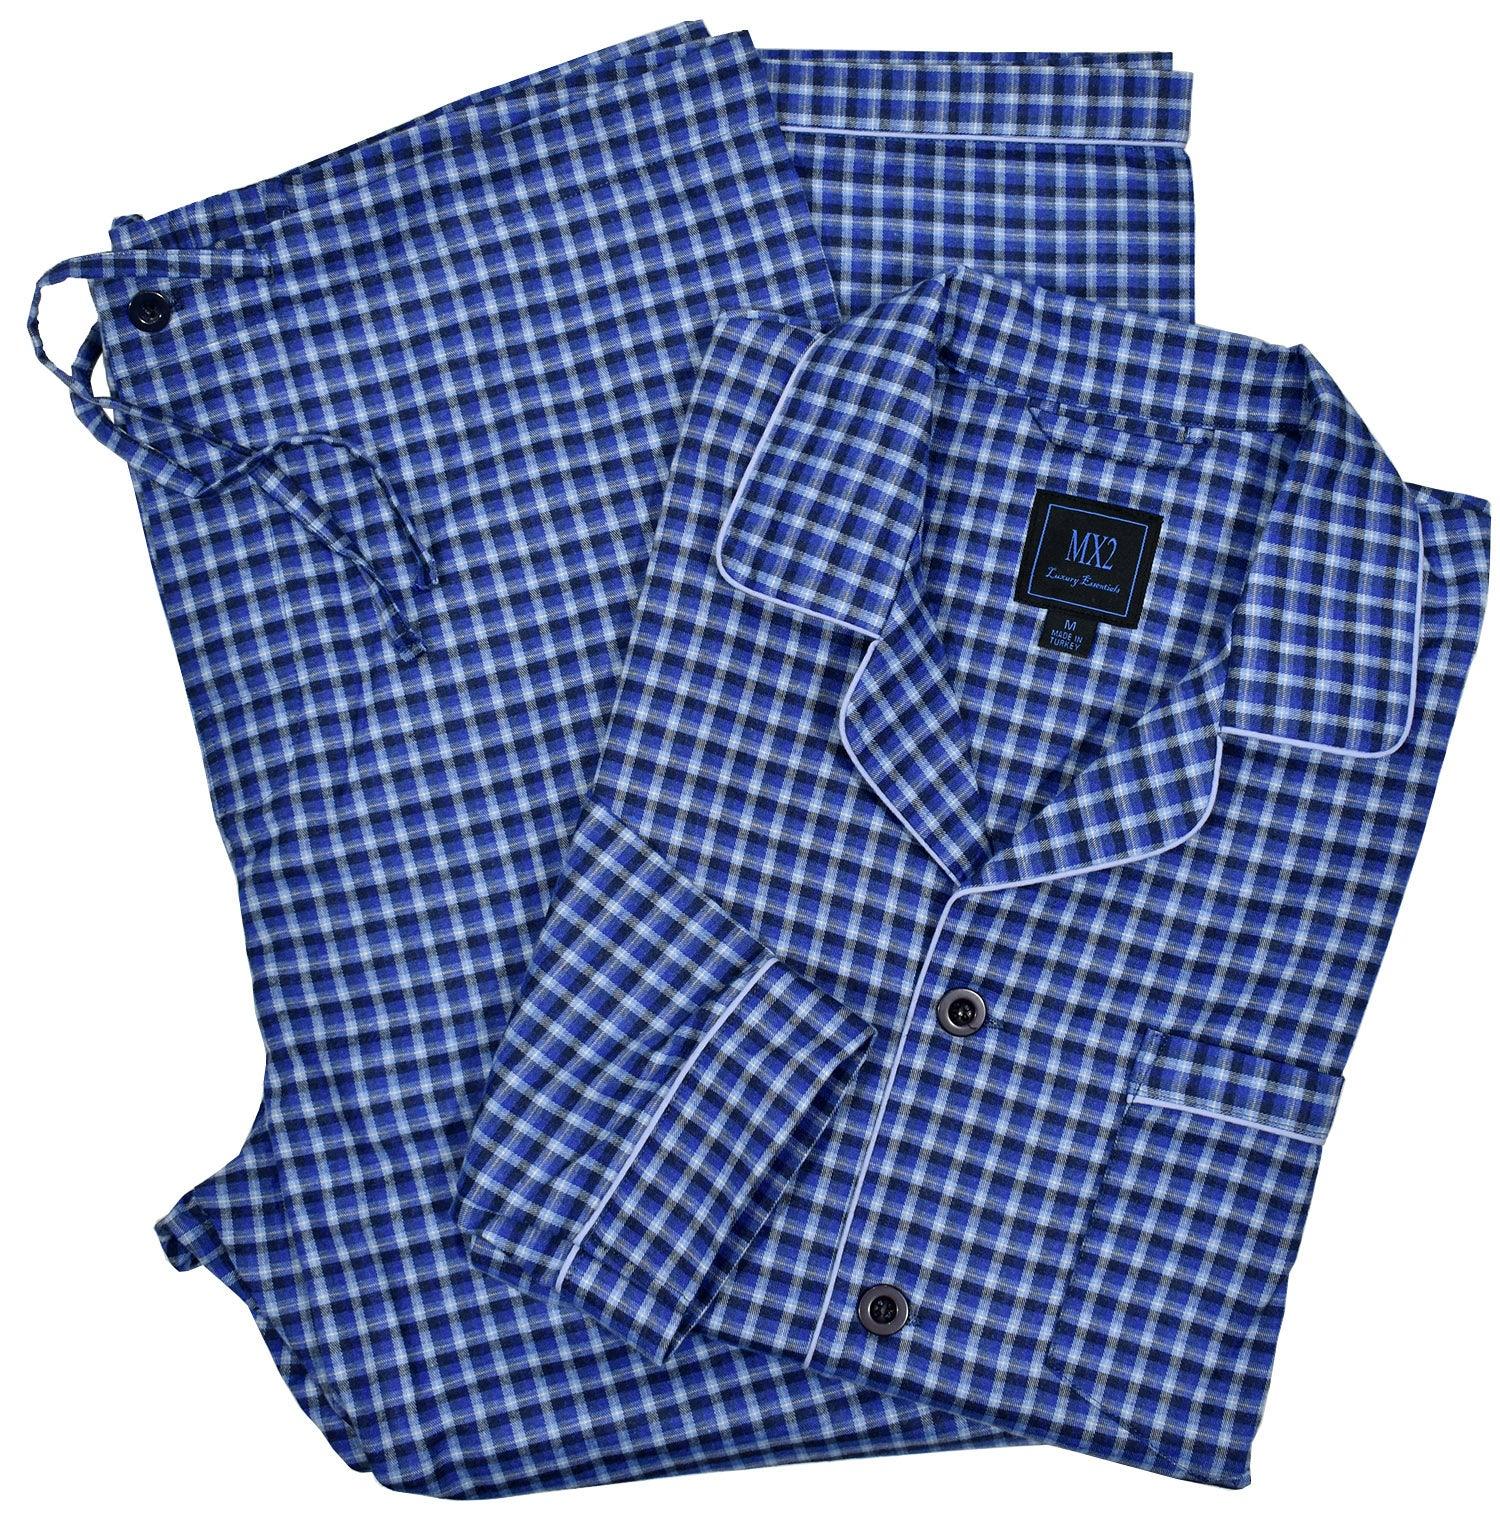 Soft cotton woven fabric. Traditional fashion pattern. Medium blue plaid with soft grey and charcoal. Classic coat top with pocket, button closure and edge piping. Classic draw string pant with a touch of elastic for comfort. Classic fit.  By Marcello Sport